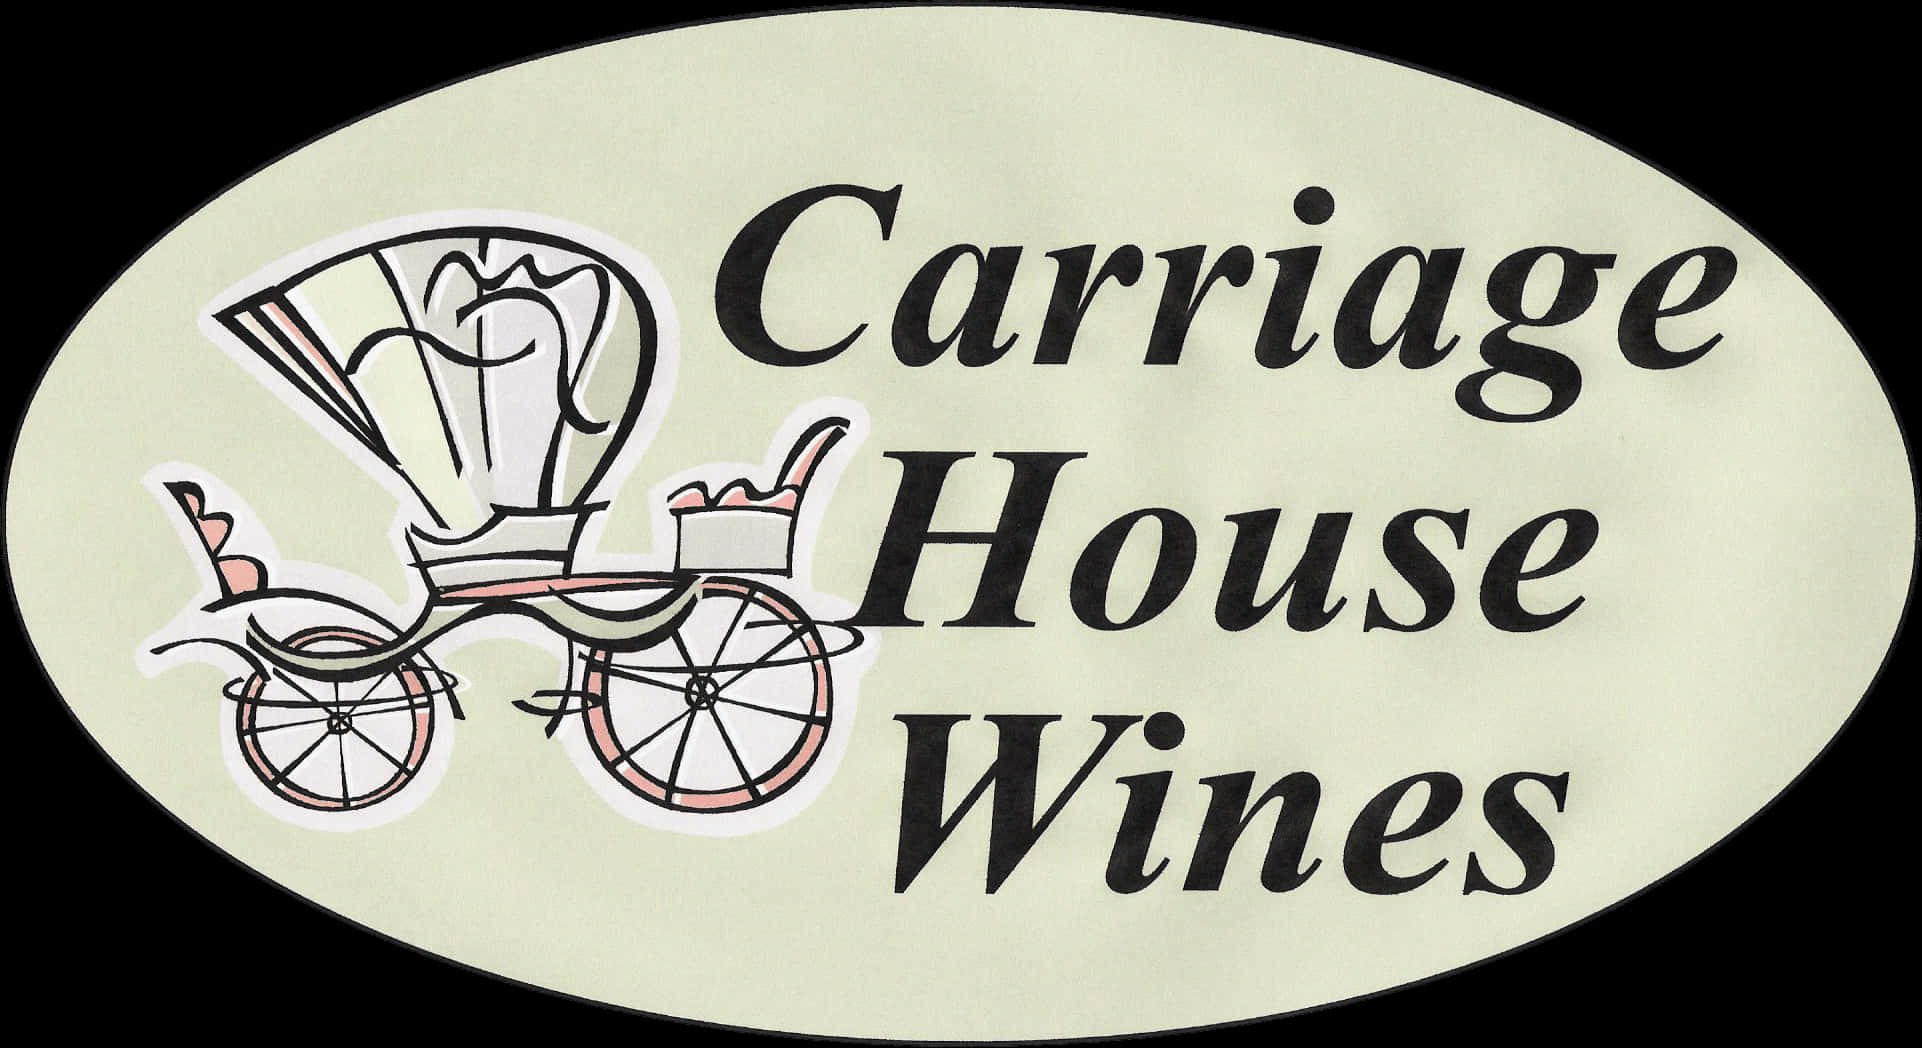 Carriage House Wines Logo PNG image